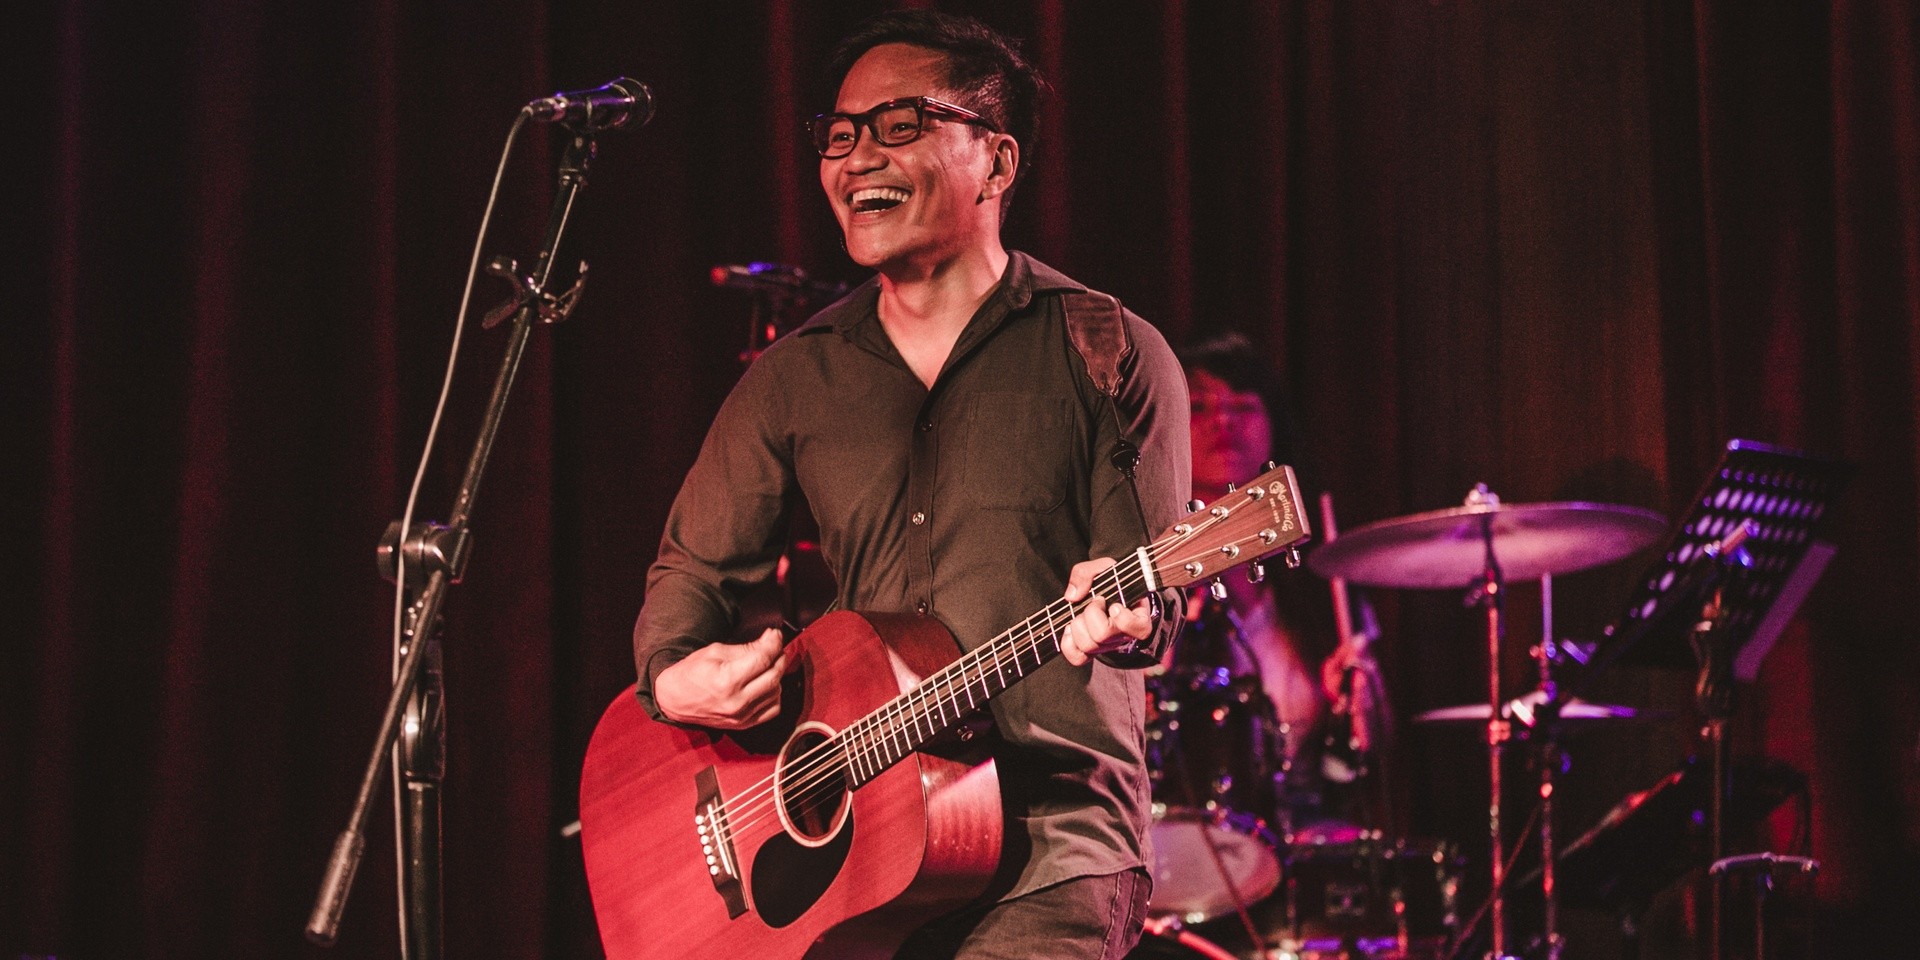 "Rico Blanco and I are working on songs." Ebe Dancel signs with Widescope Entertainment, updates fans on new music